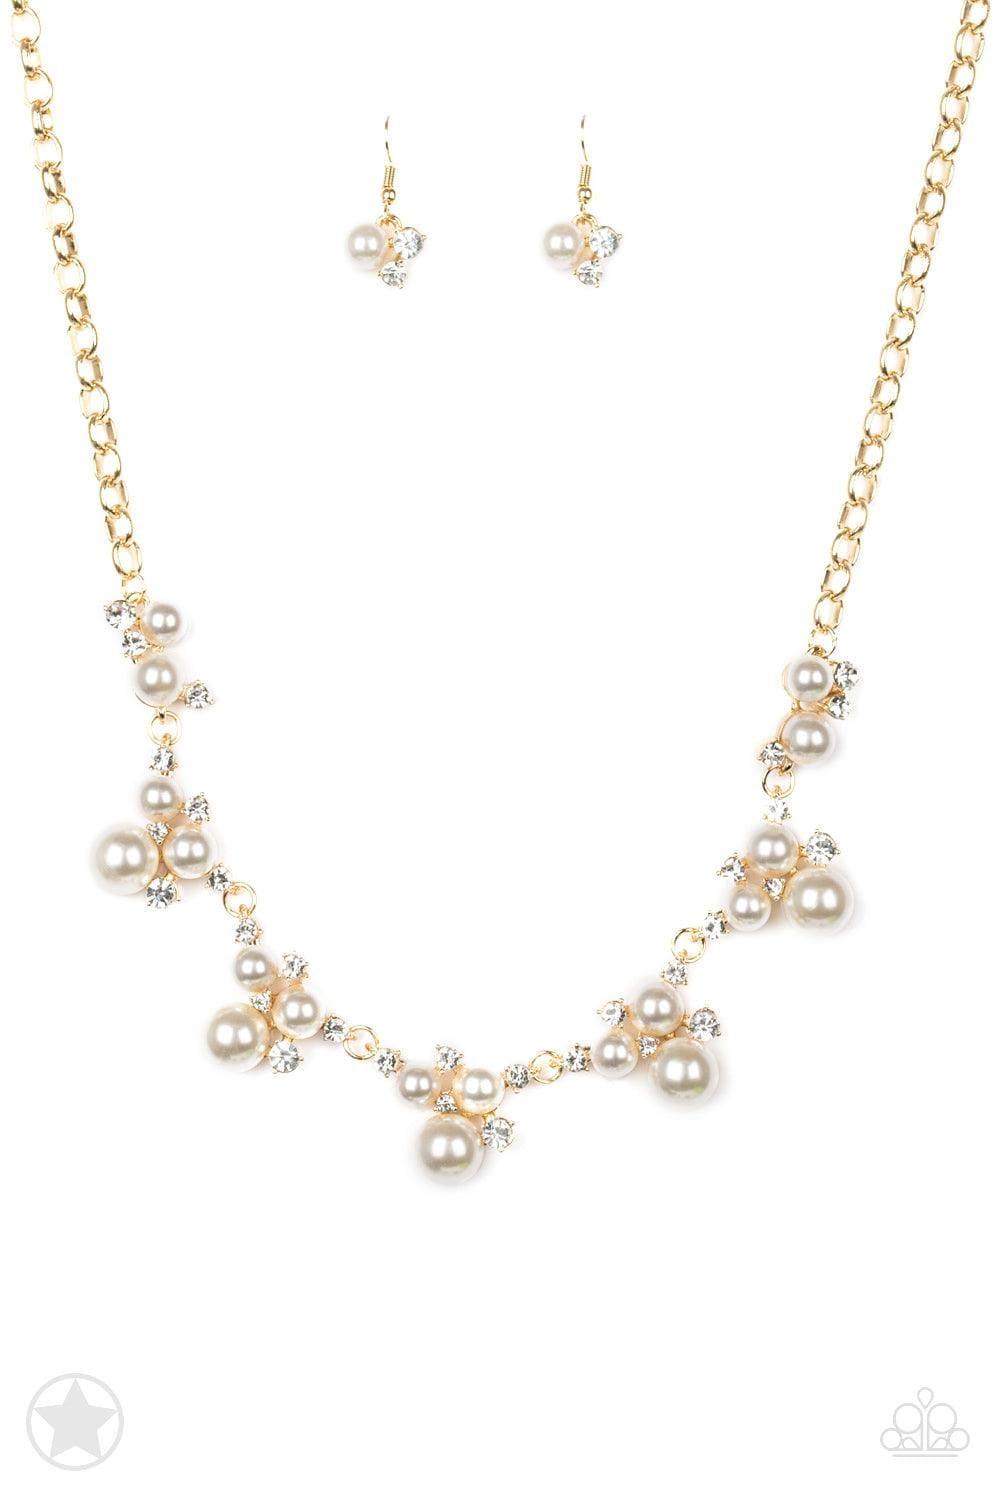 Paparazzi Accessories - Paparazzi Blockbuster Necklace: Toast To Perfection Gold - Bling by JessieK